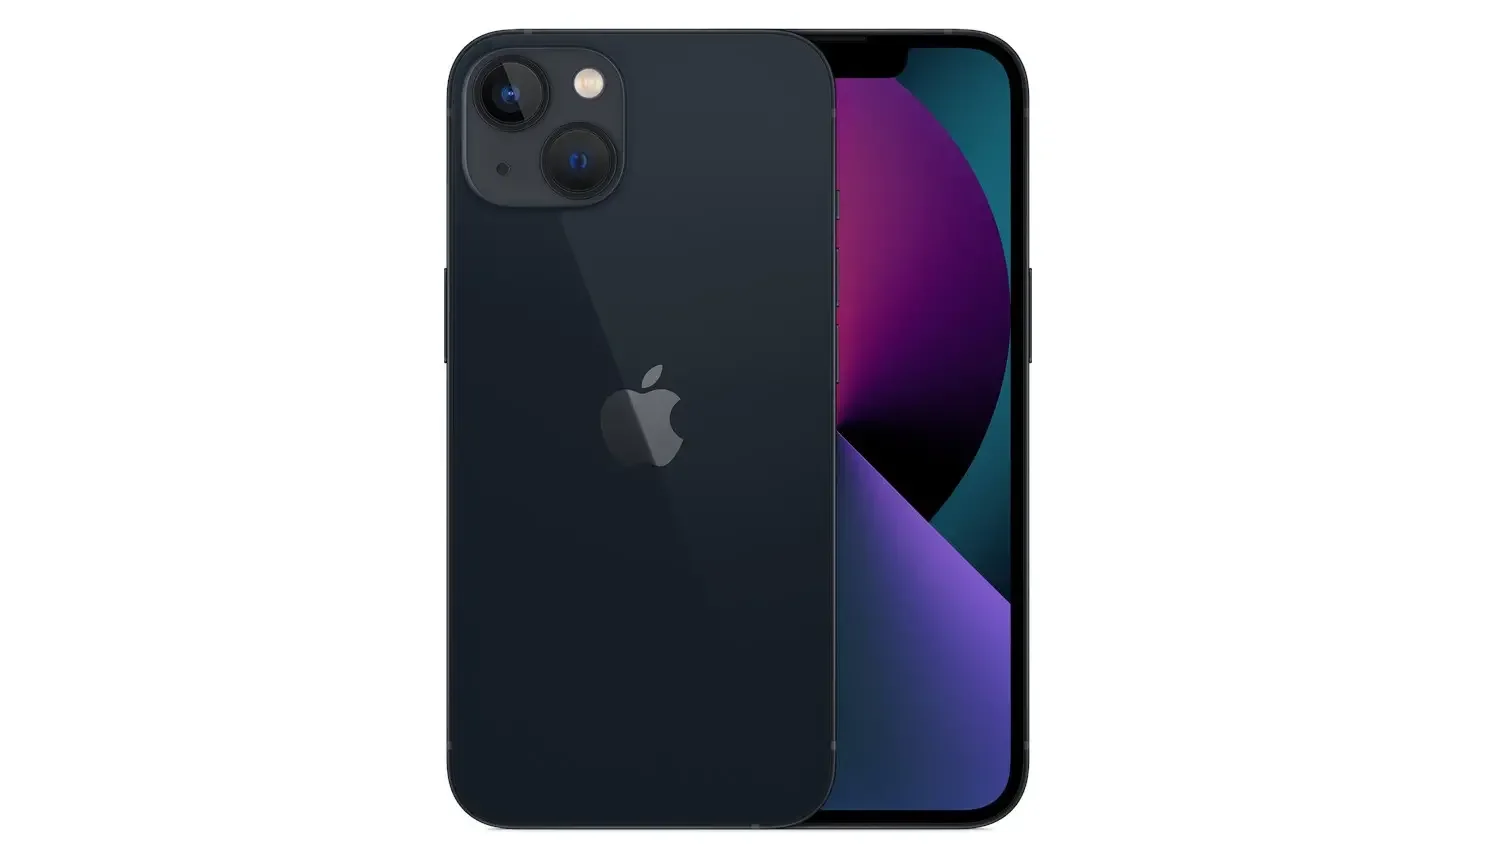 The iPhone 13 showcases the Midnight color - iPhone 14 colors expectations: what we've heard so far